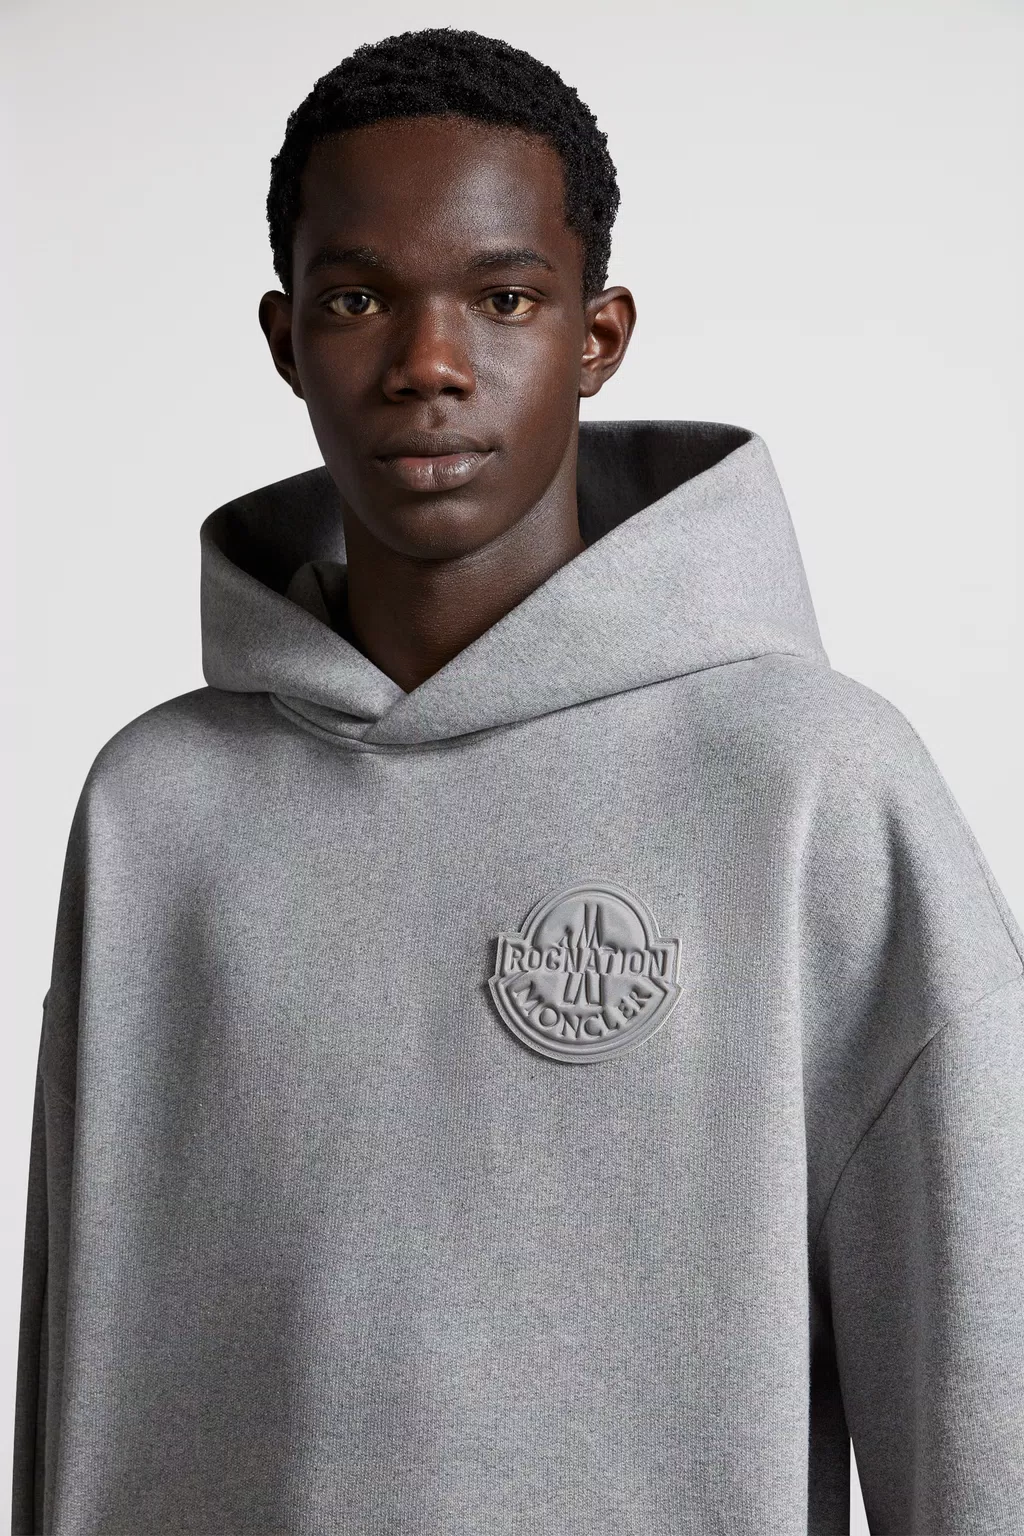 Grey Logo Patch Hoodie - Moncler x Roc Nation designed by Jay-Z for ...